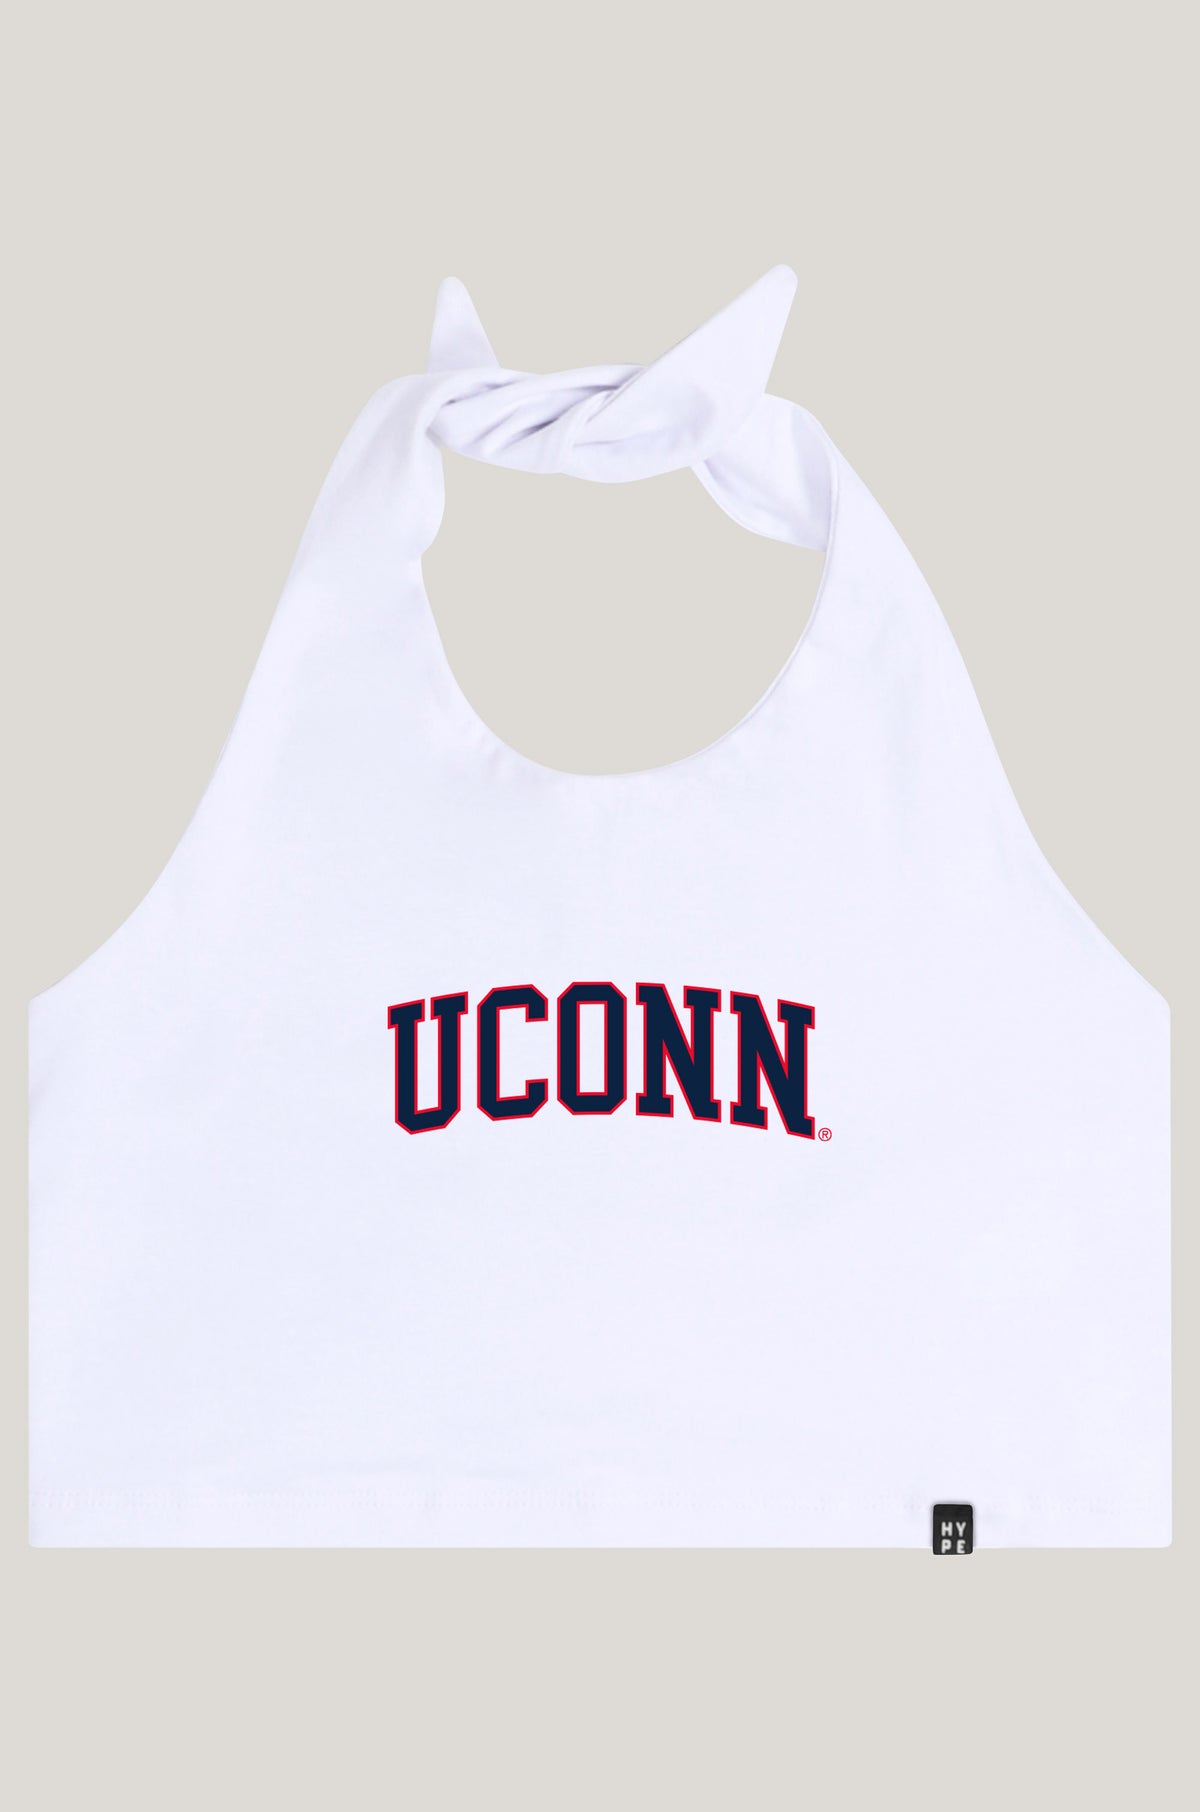 UConn Tailgate Top